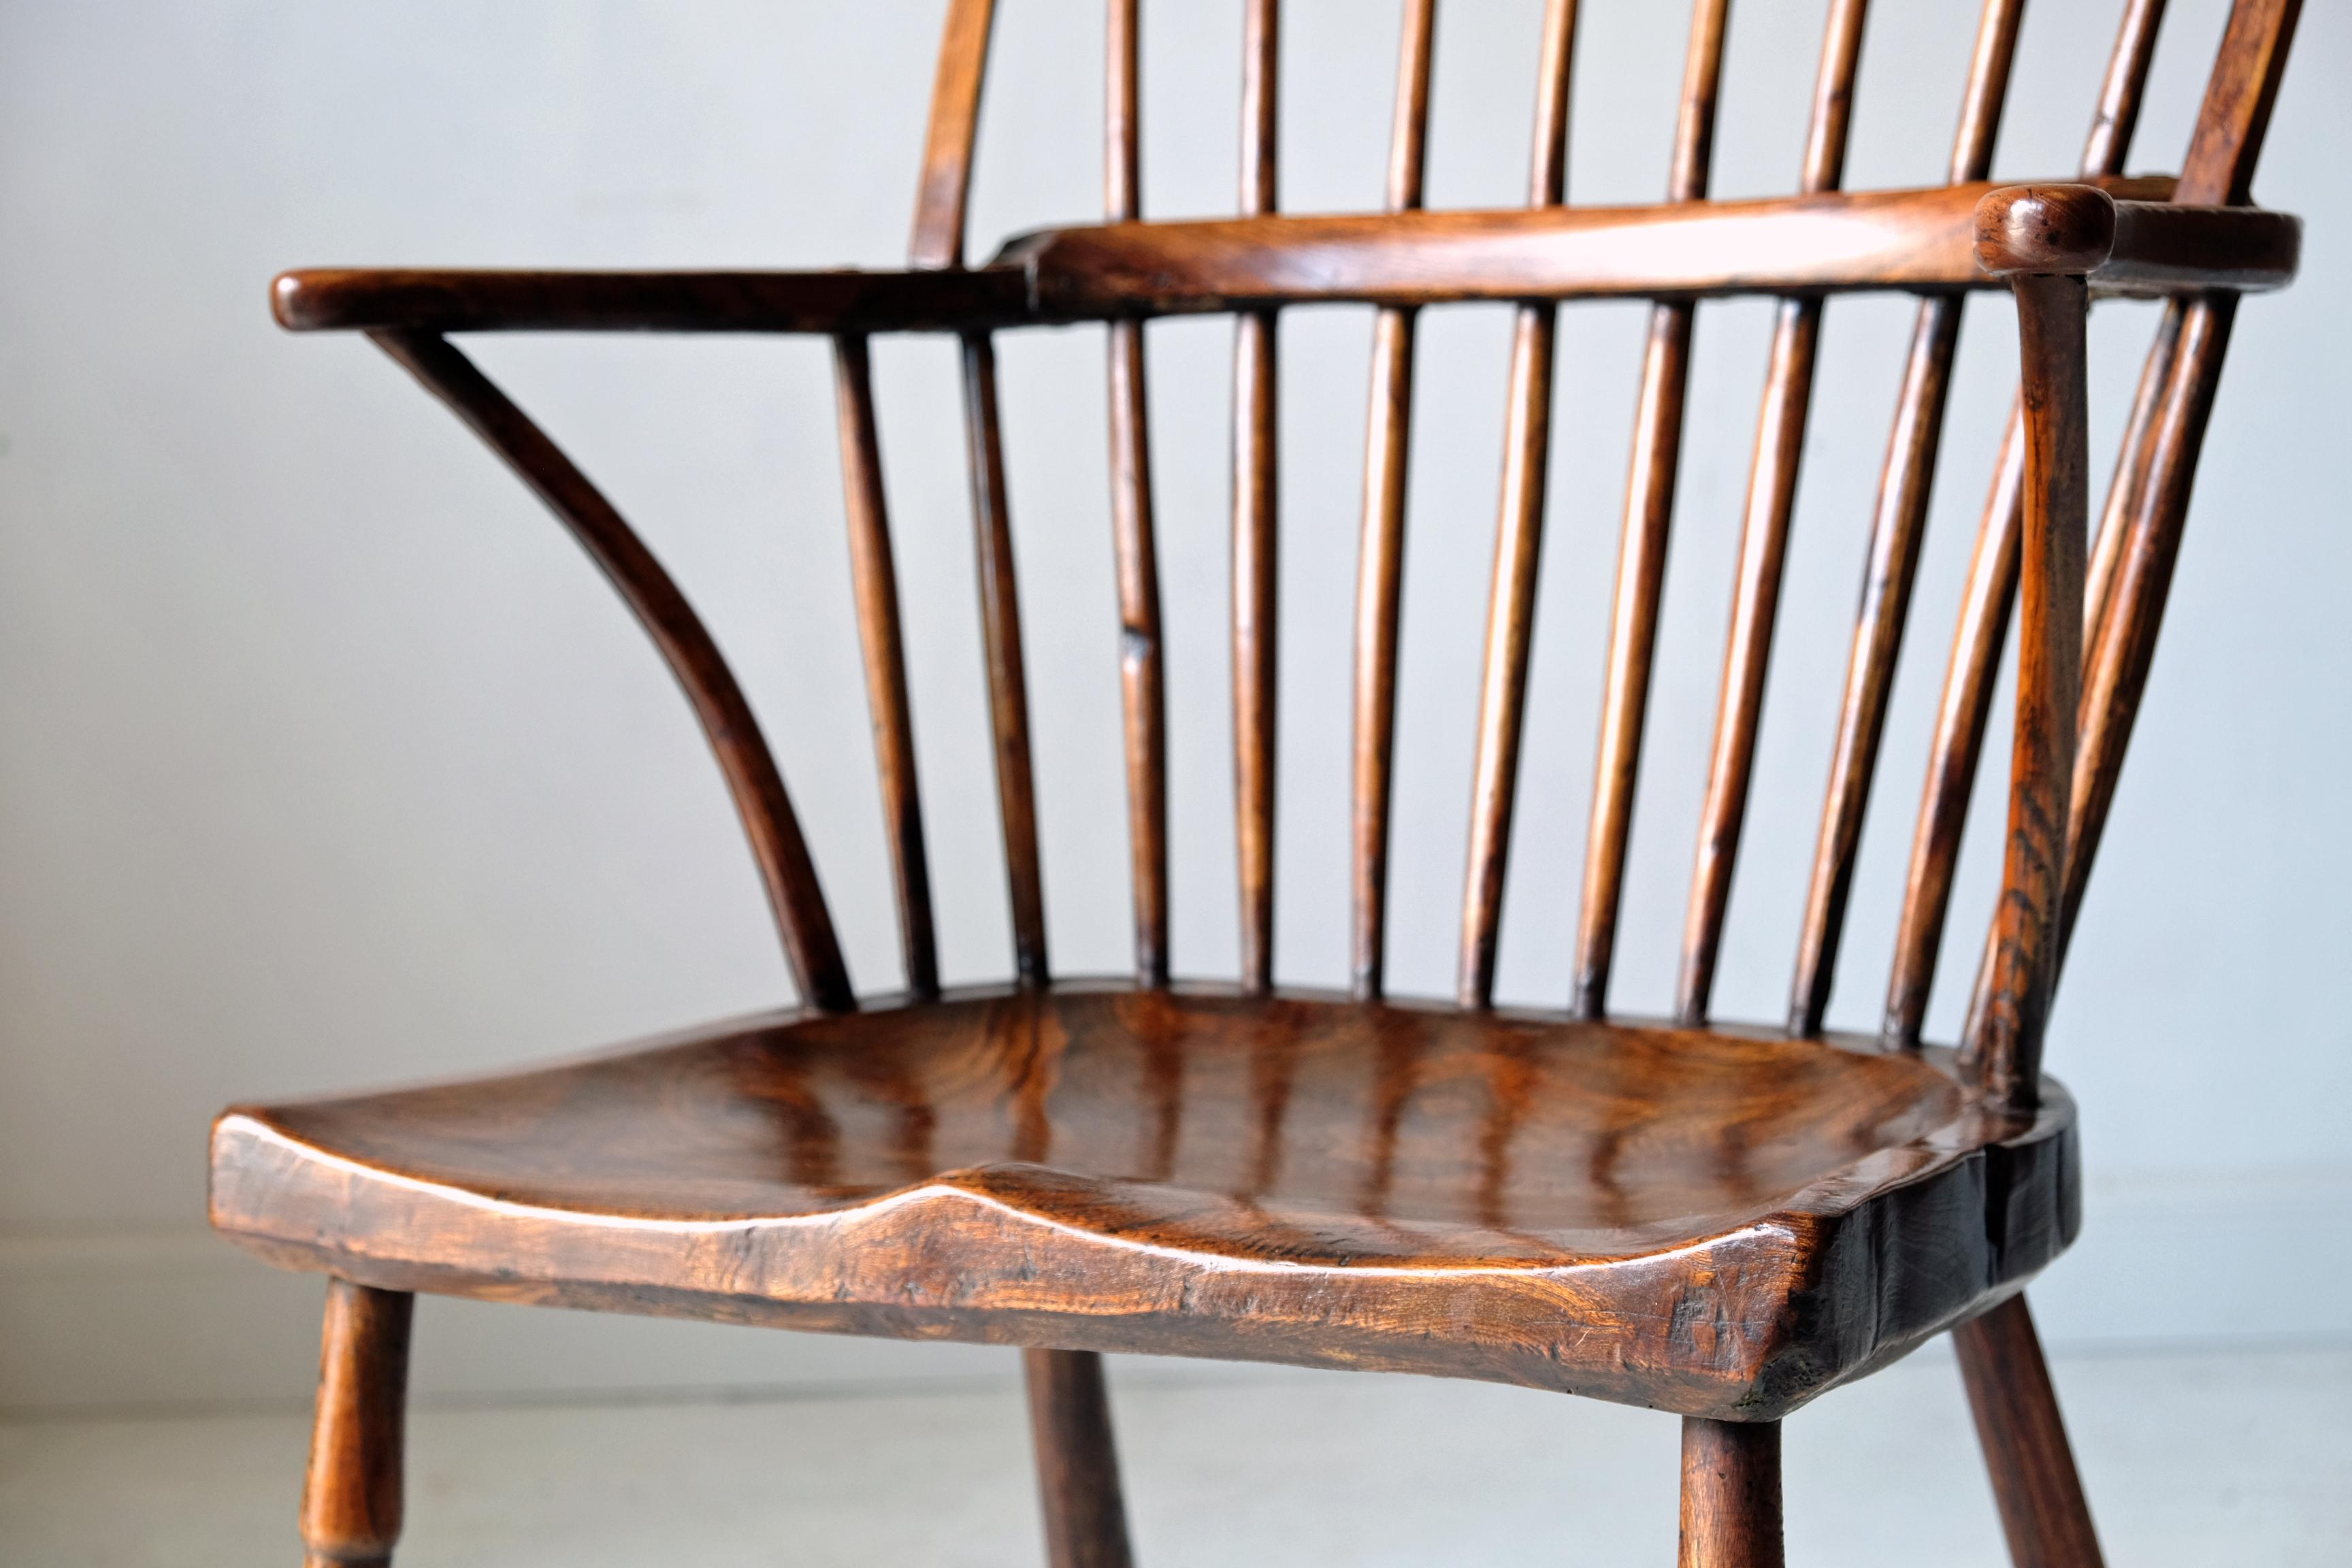 Simple Burr Elm Country Windsor Chair, Early 19th Century, Rustic, English 1